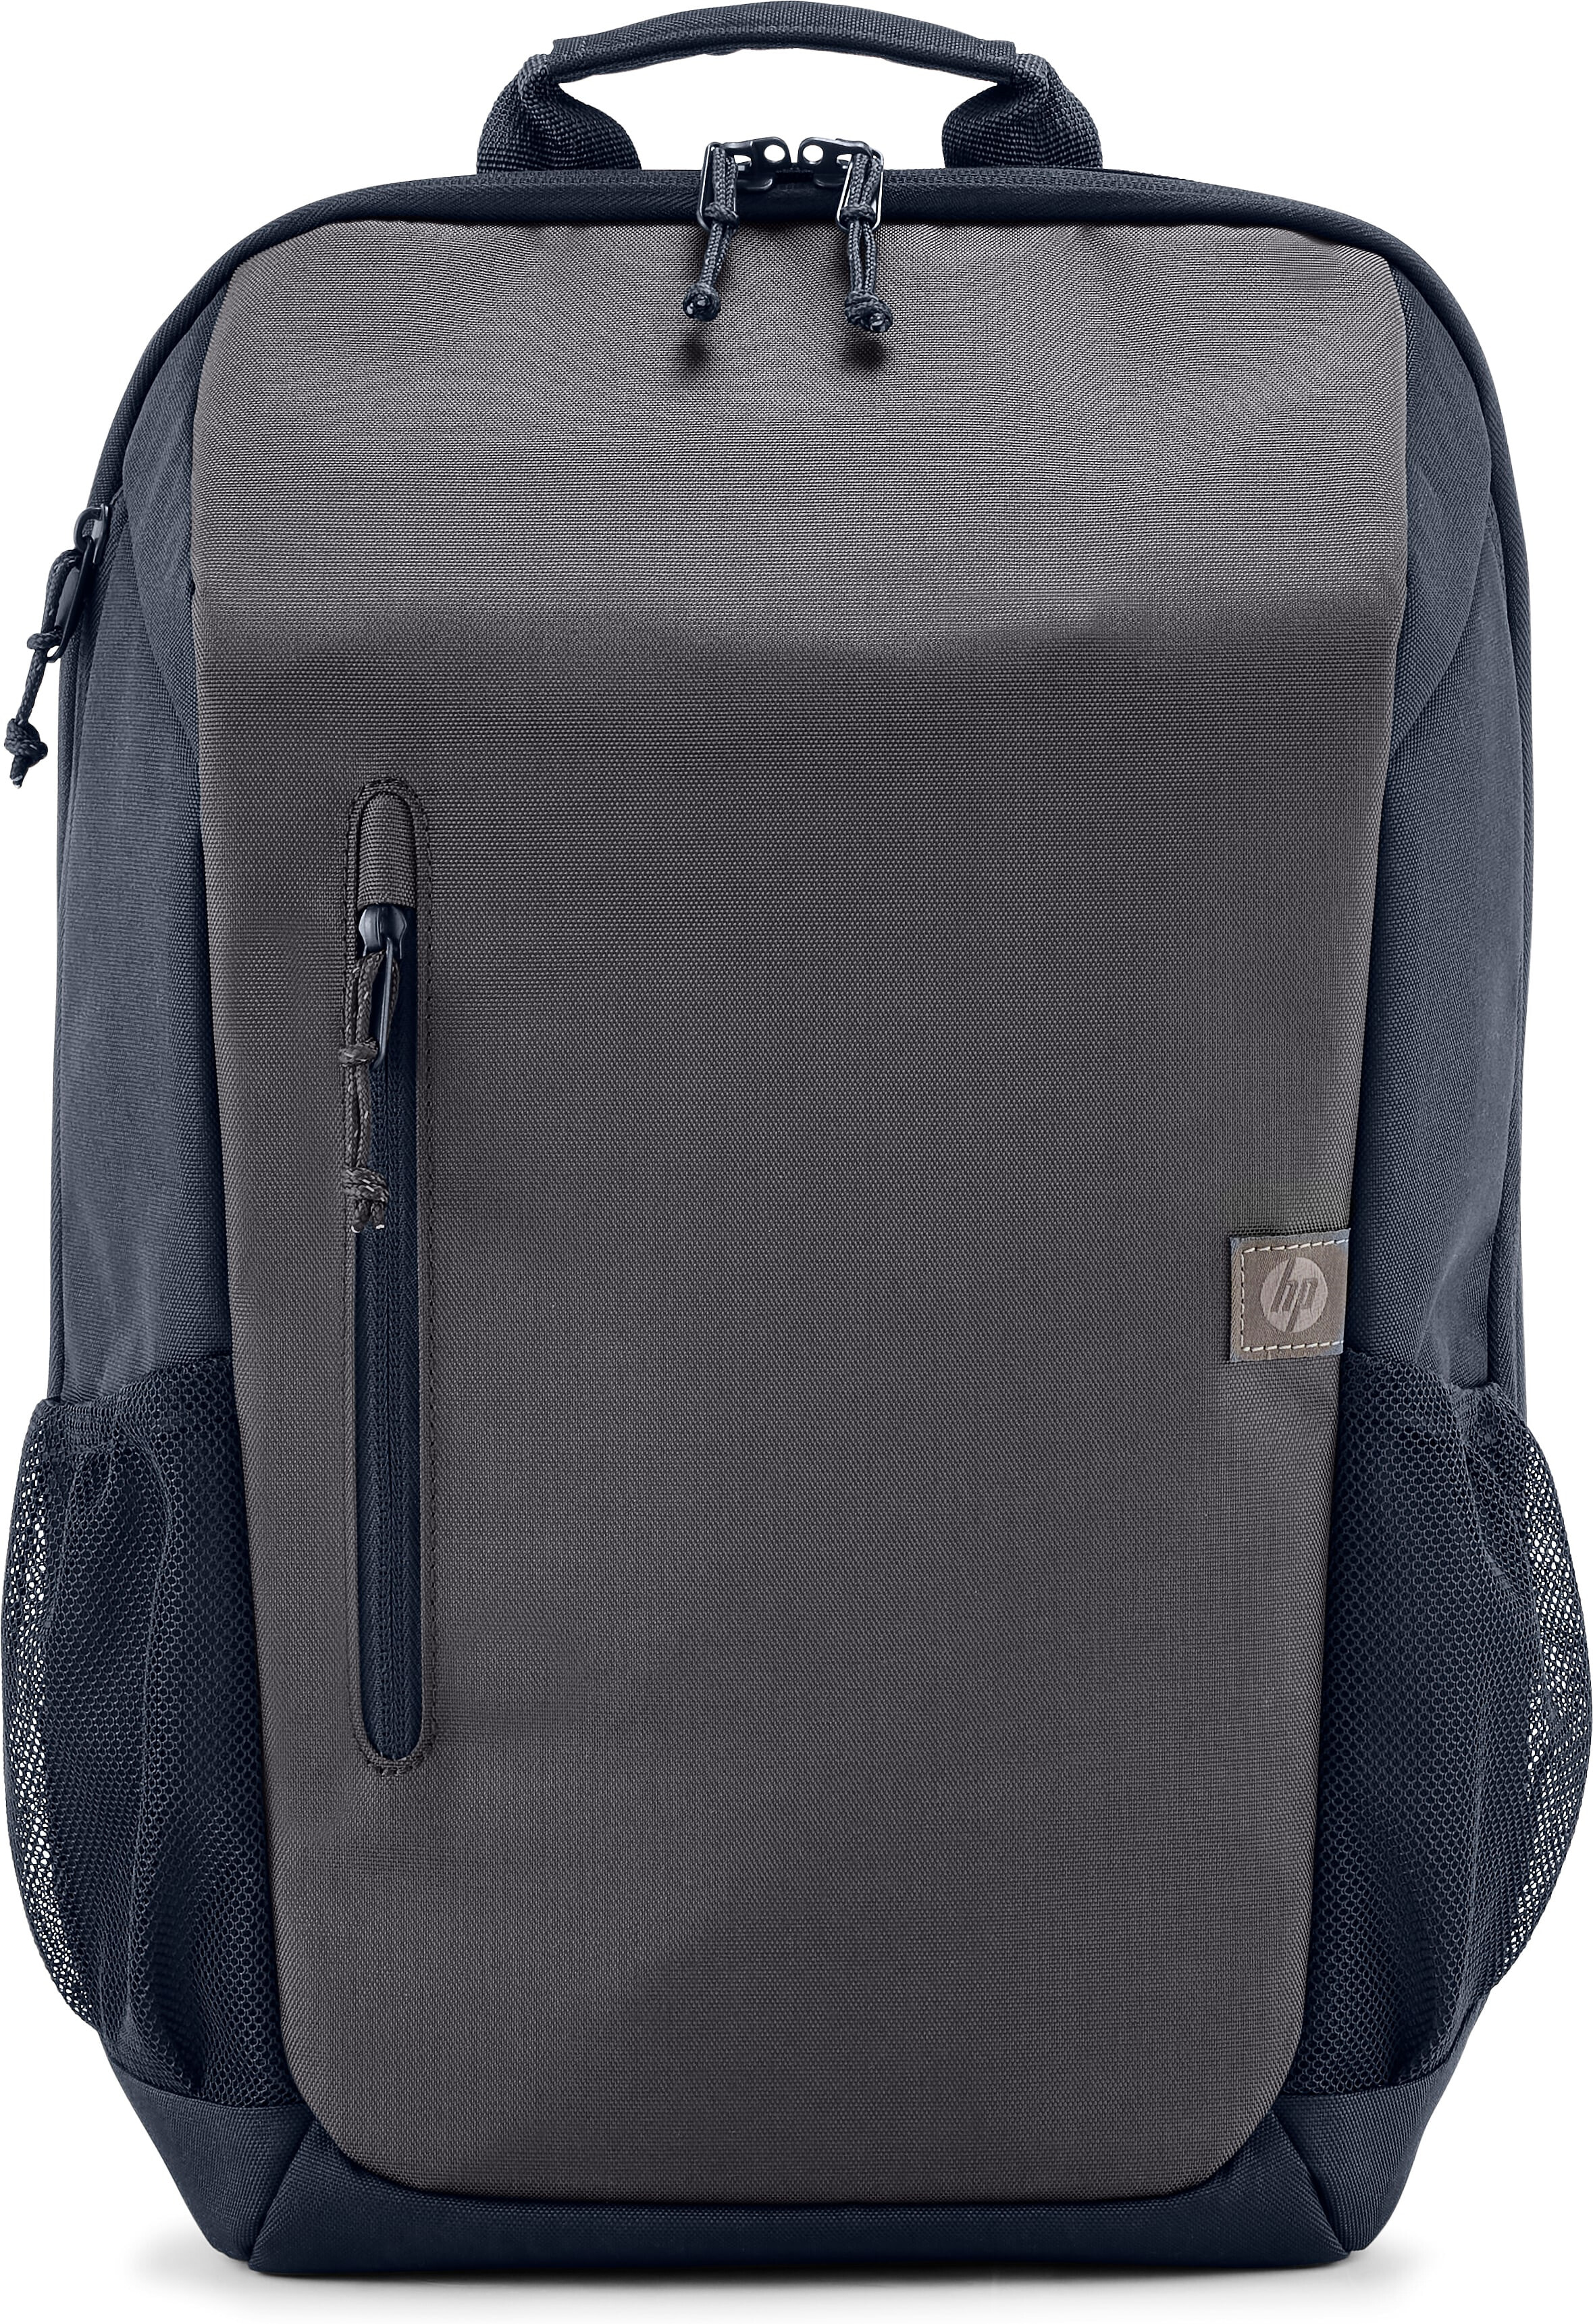 HP 18L Travel Bag - Forged Iron